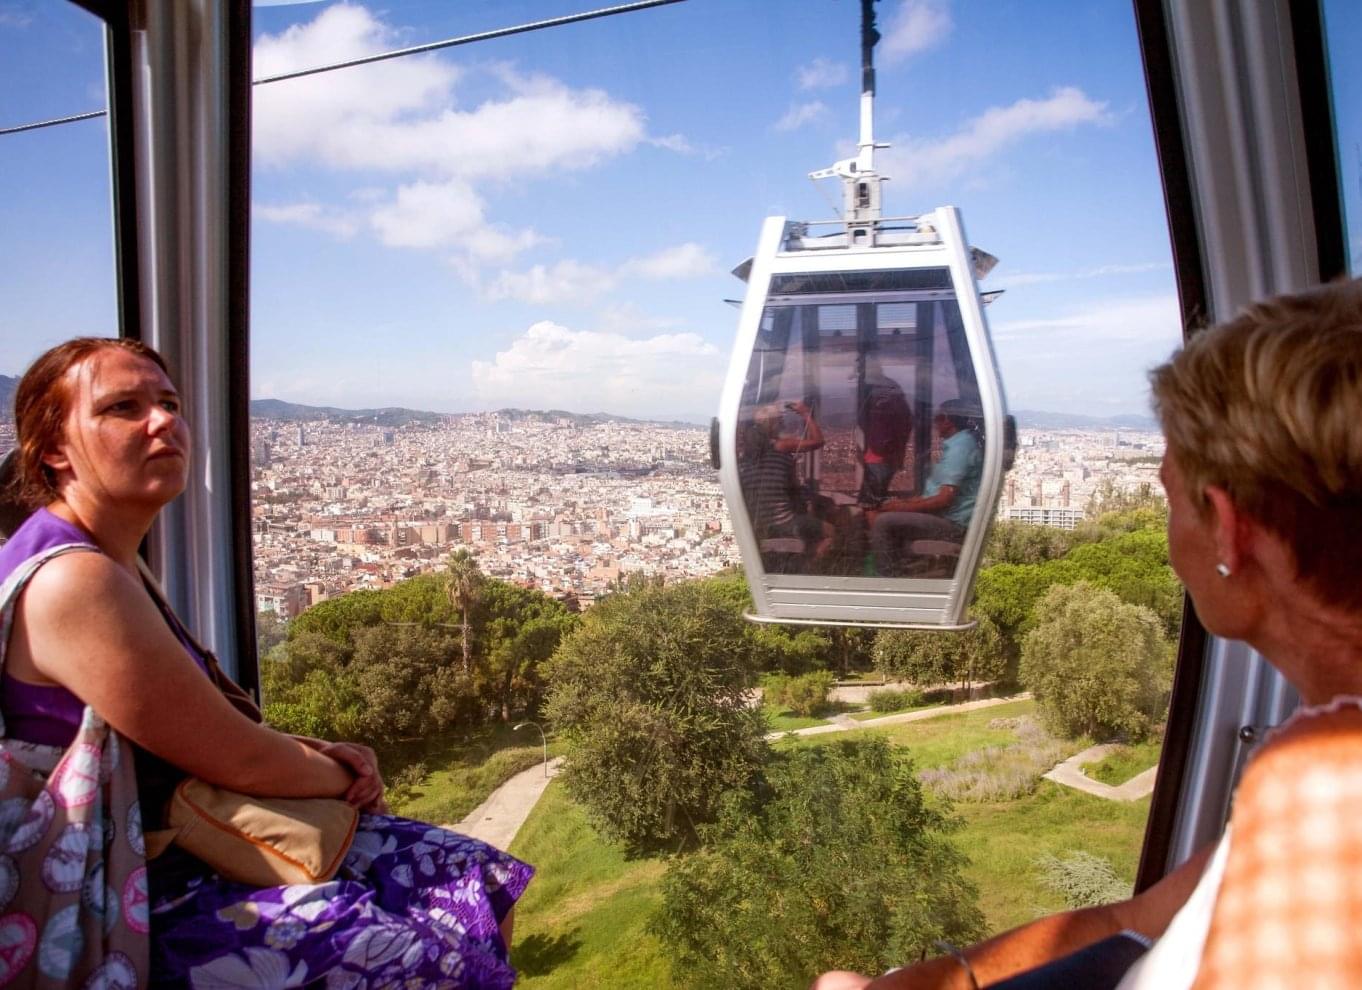 Spend some good time with your loved ones at Montjuic Cable Car